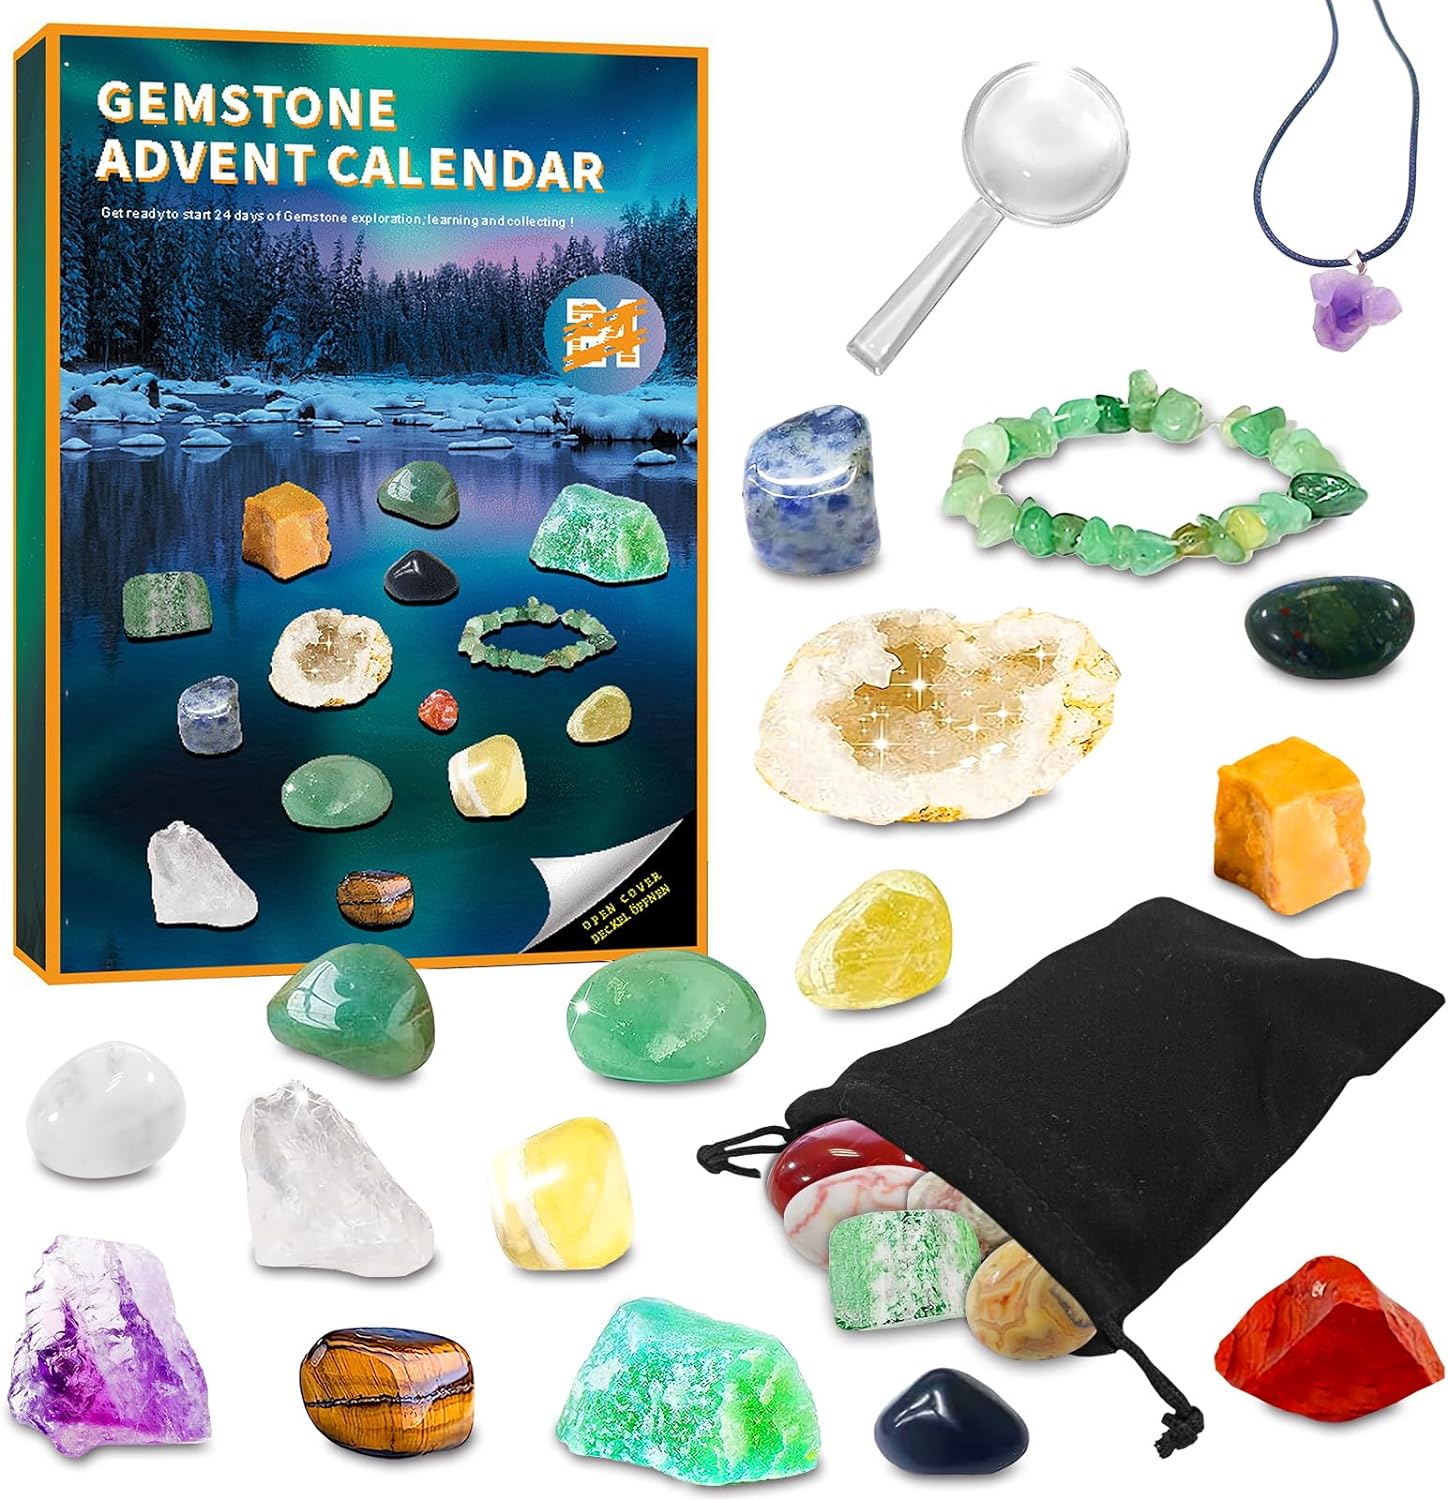 Advent Calendar 2023, Christmas Countdown Calendar for Children, 24 Days Collection of Rocks, Minerals, Gemstones and Crystals, Best Gift for Boys, Girls and Geology Enthusiasts